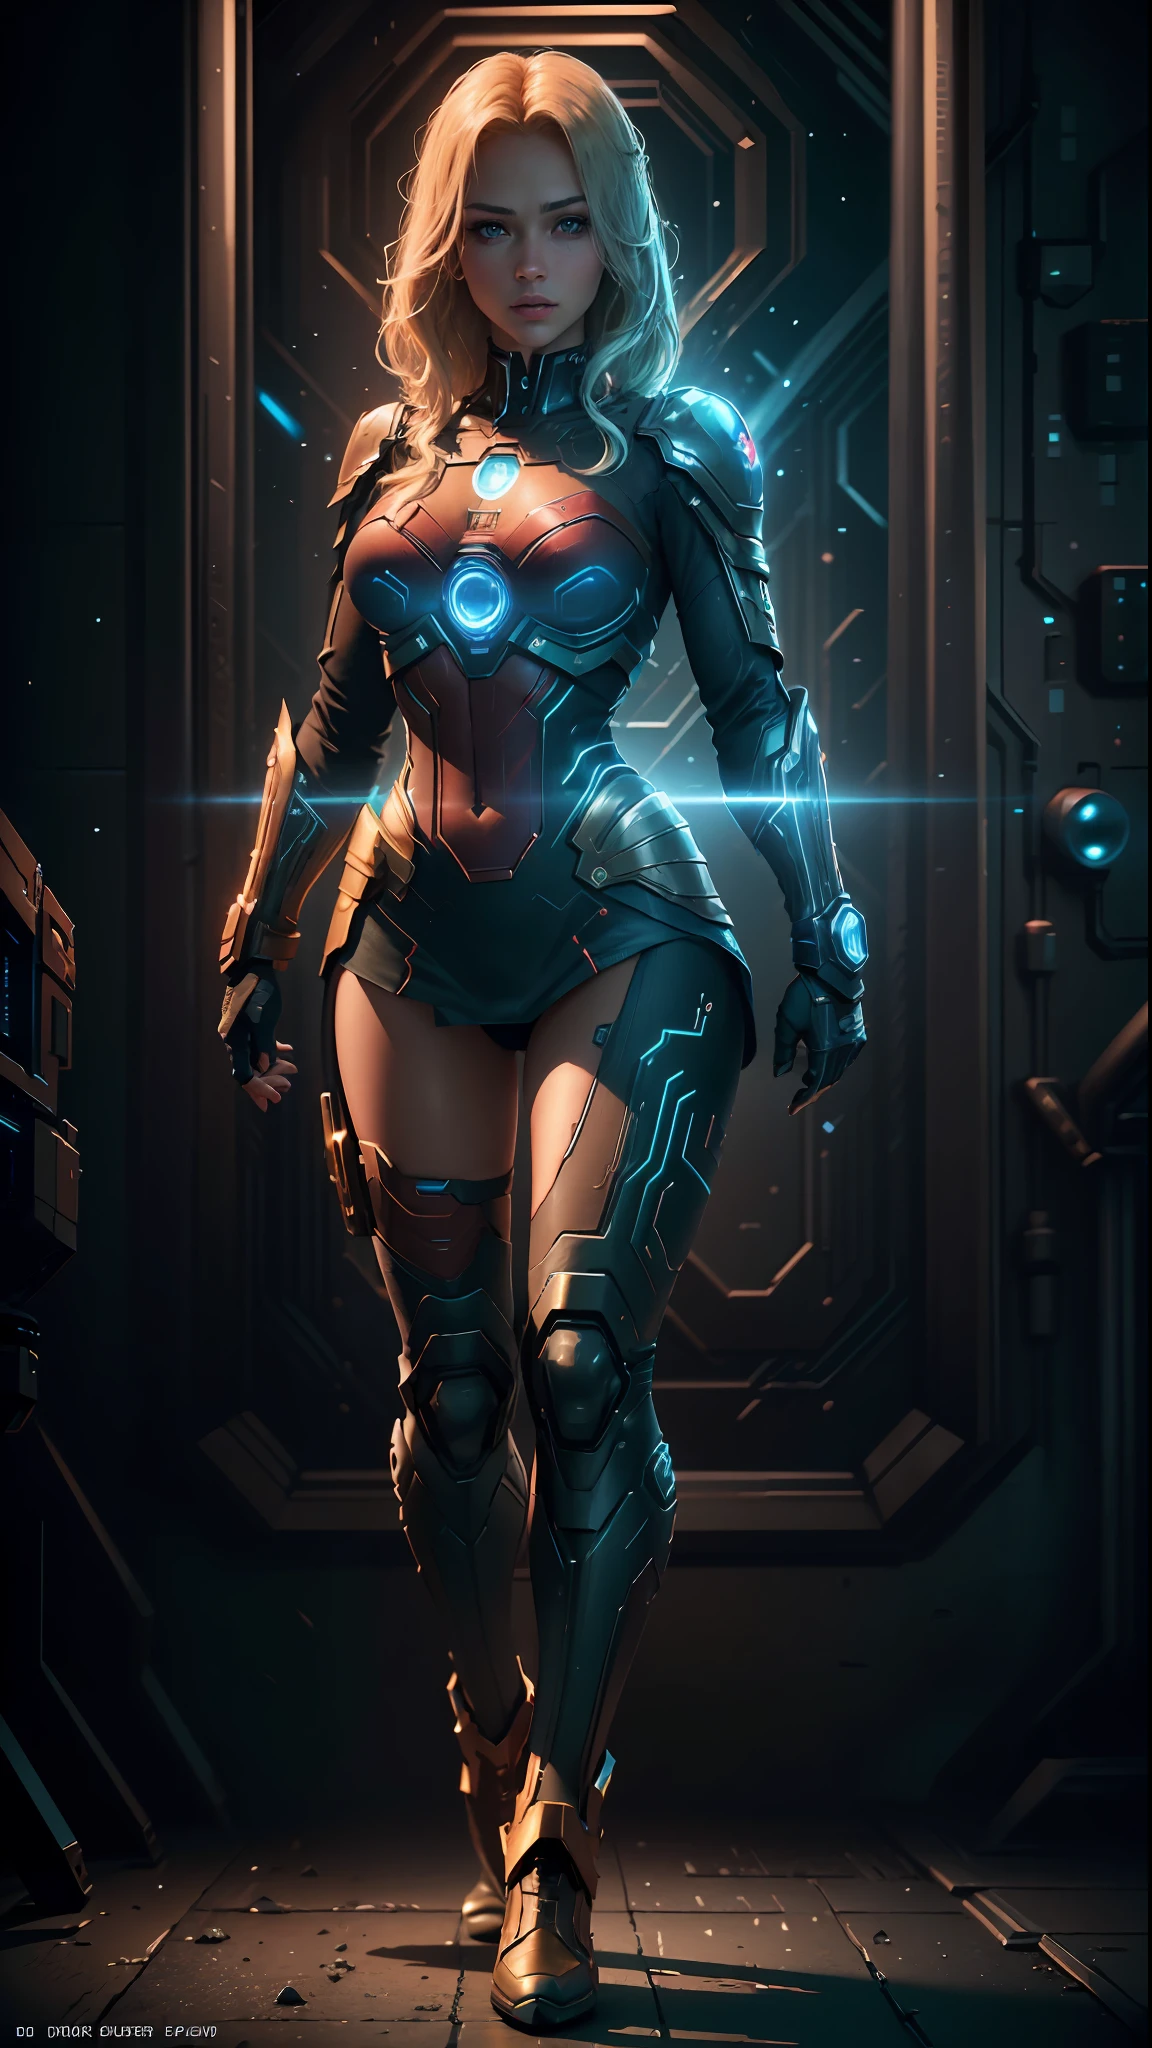 ((Best Quality)), ((Masterpiece)), (Detailed: 1.4), 3D, an image of a beautiful cyberpunk Supergirl,HDR (High Dynamic Range),Ray Tracing,NVIDIA RTX,Super-Resolution,Unreal 5,Subsurface Dispersion, PBR Texture, Post-processing, Anisotropic Filtering, Depth of Field, Maximum Clarity and Sharpness, Multilayer Textures, Albedo and Specular Maps, Surface Shading, Accurate Simulation of Light-Material Interaction, Perfect Proportions, Octane Render,  Two-Tone Lighting,Wide Aperture,Low ISO,White Balance,Rule of Thirds,8K RAW,CircuitBoardAI, Blonde Hair, Blue Eyes, Superman S Symbol on Chest, Red Color Boots.